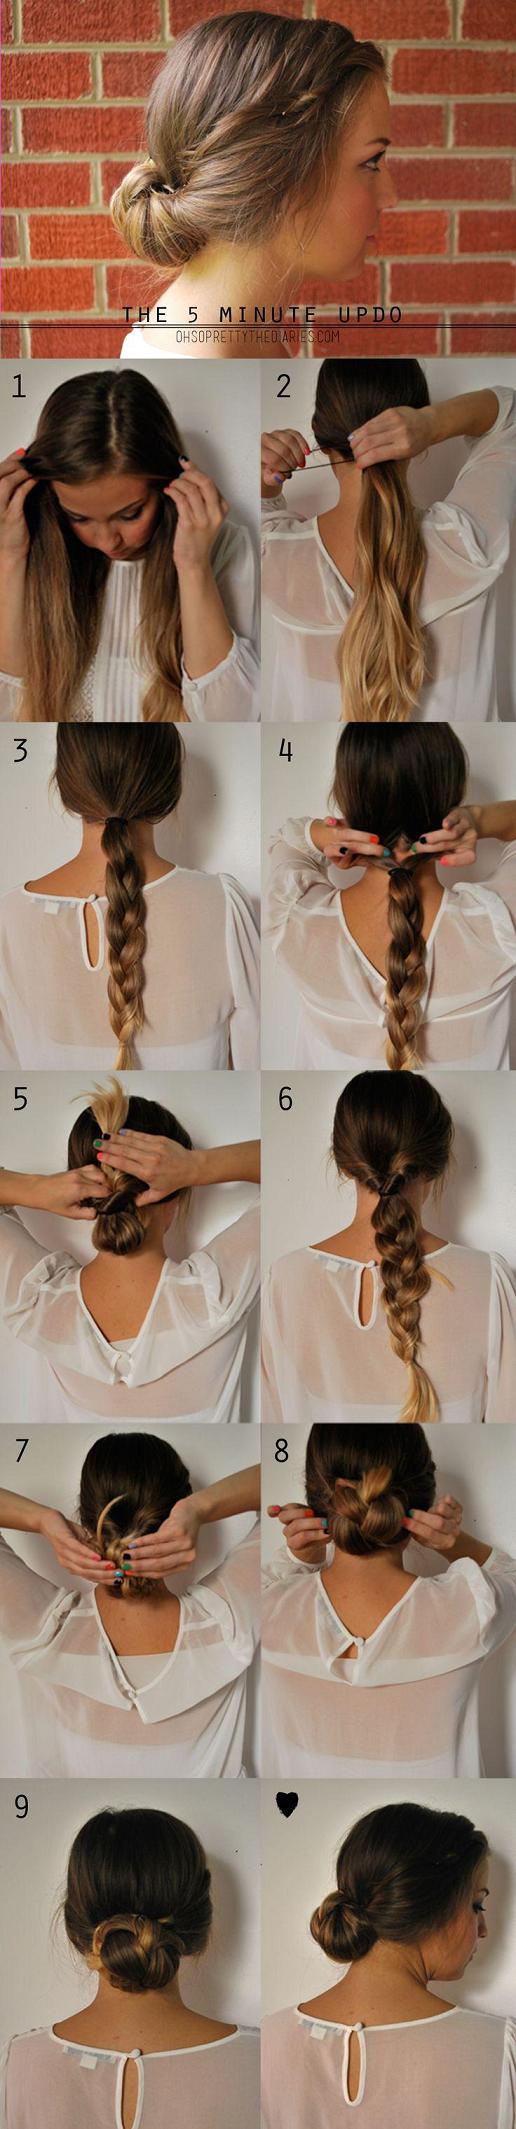 The 5 minute updo braided gibson tuck 15 Lovely and Useful Hairstyle Tutorials